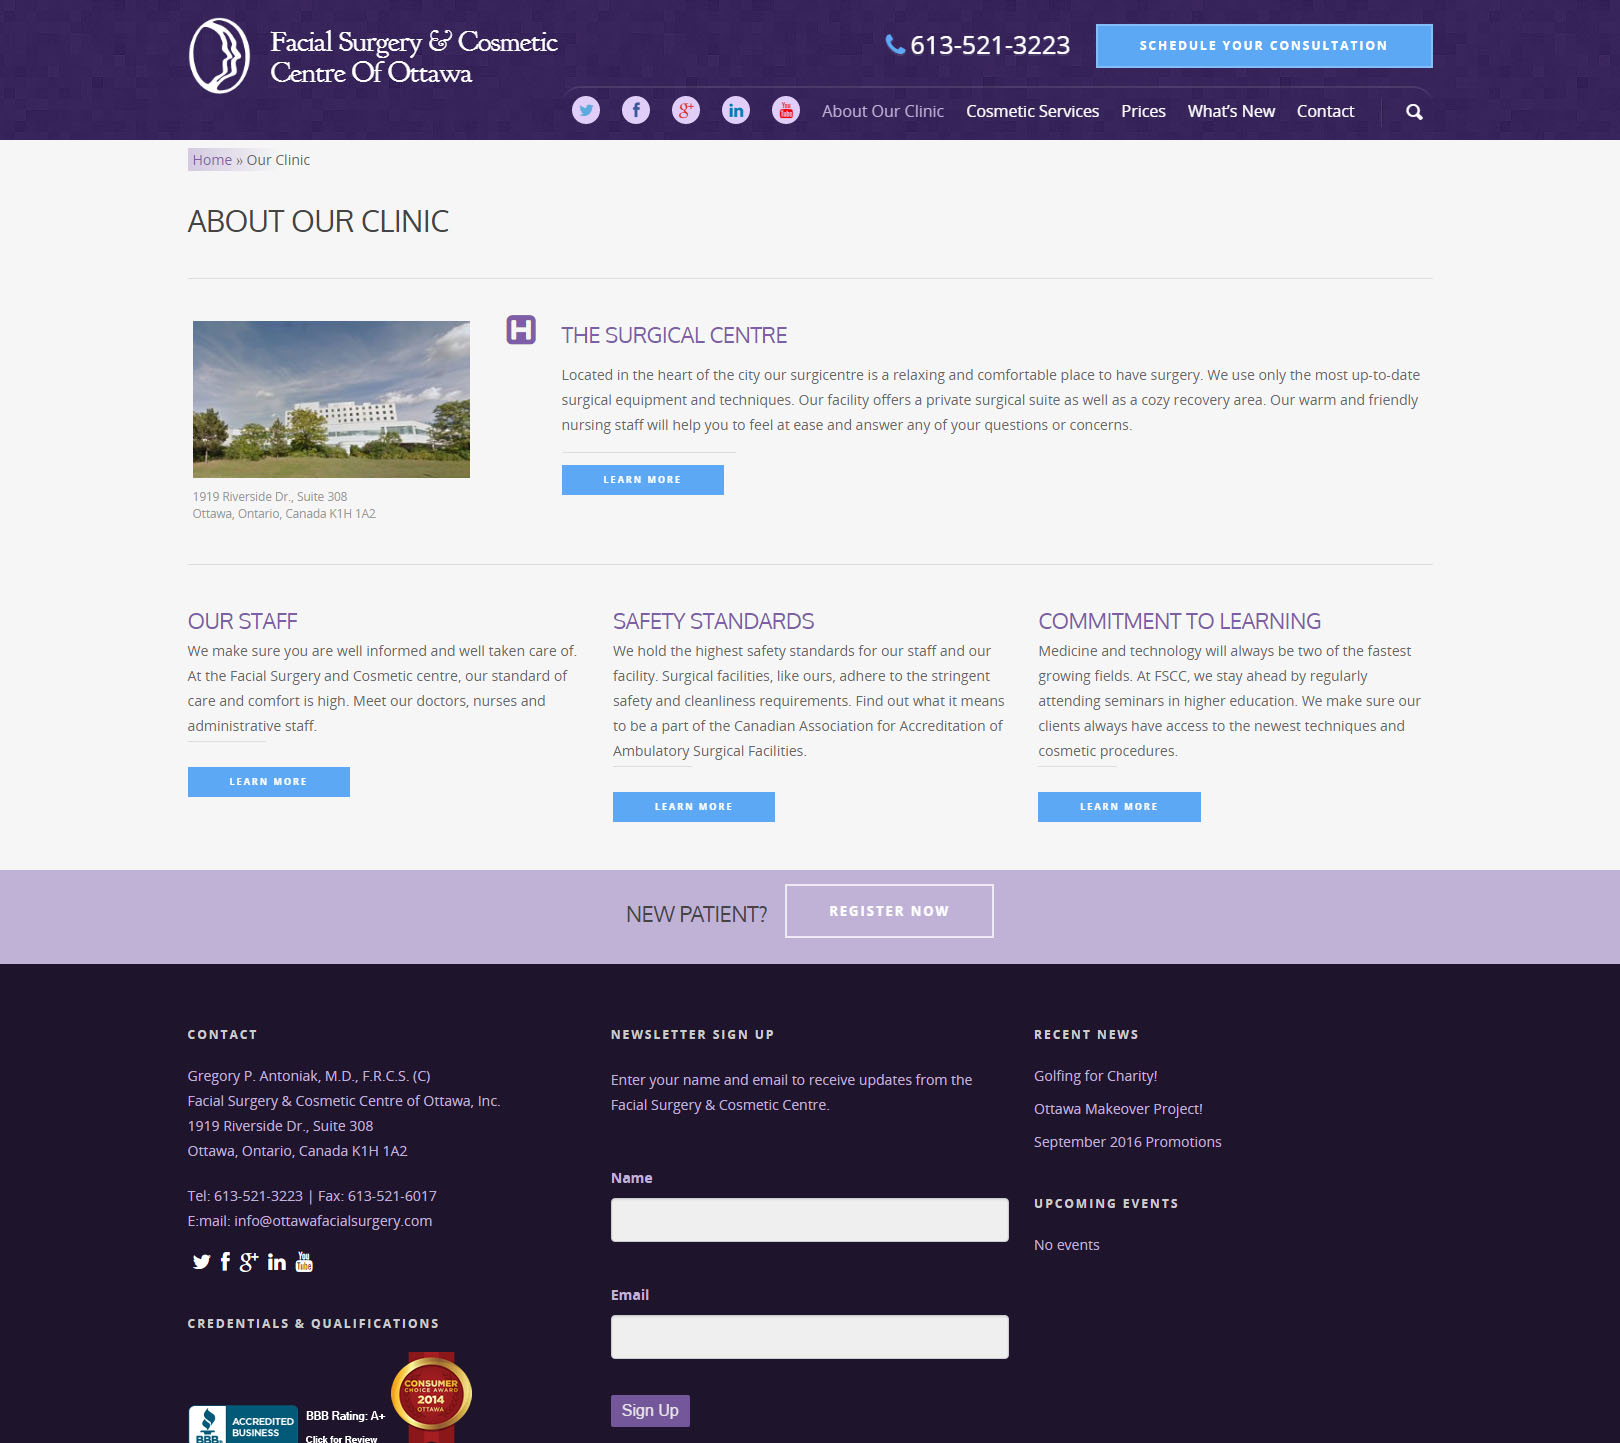 Facial Surgery and Cosmetic Centre of Ottawa website by Mediaforce